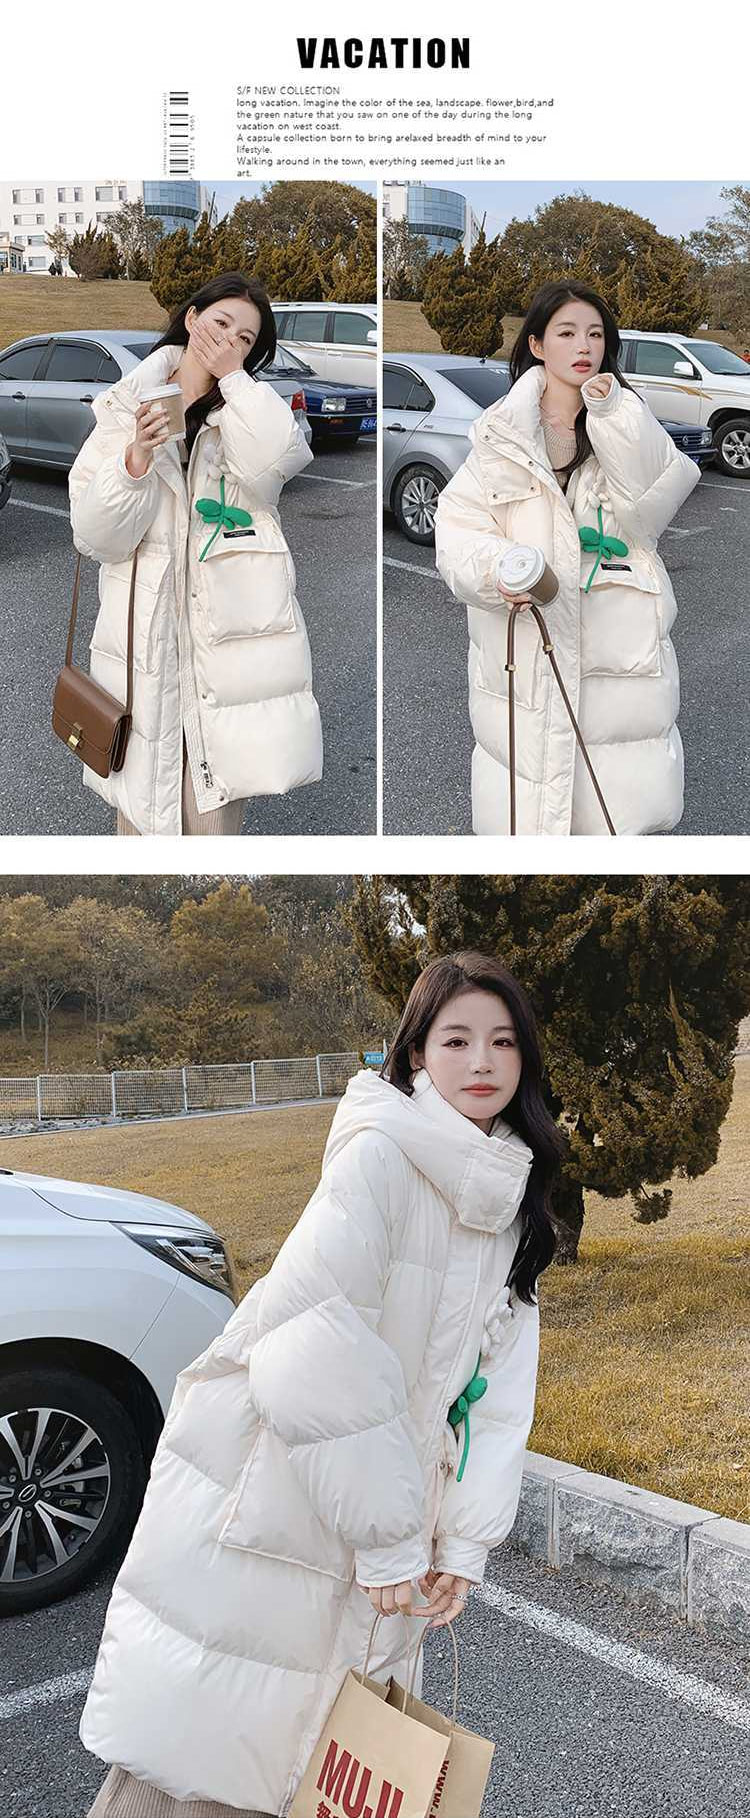 Aesthetic-White-Duck-Down-Jacket-Oversize-Hooded-Casual-Outfit17.jpg